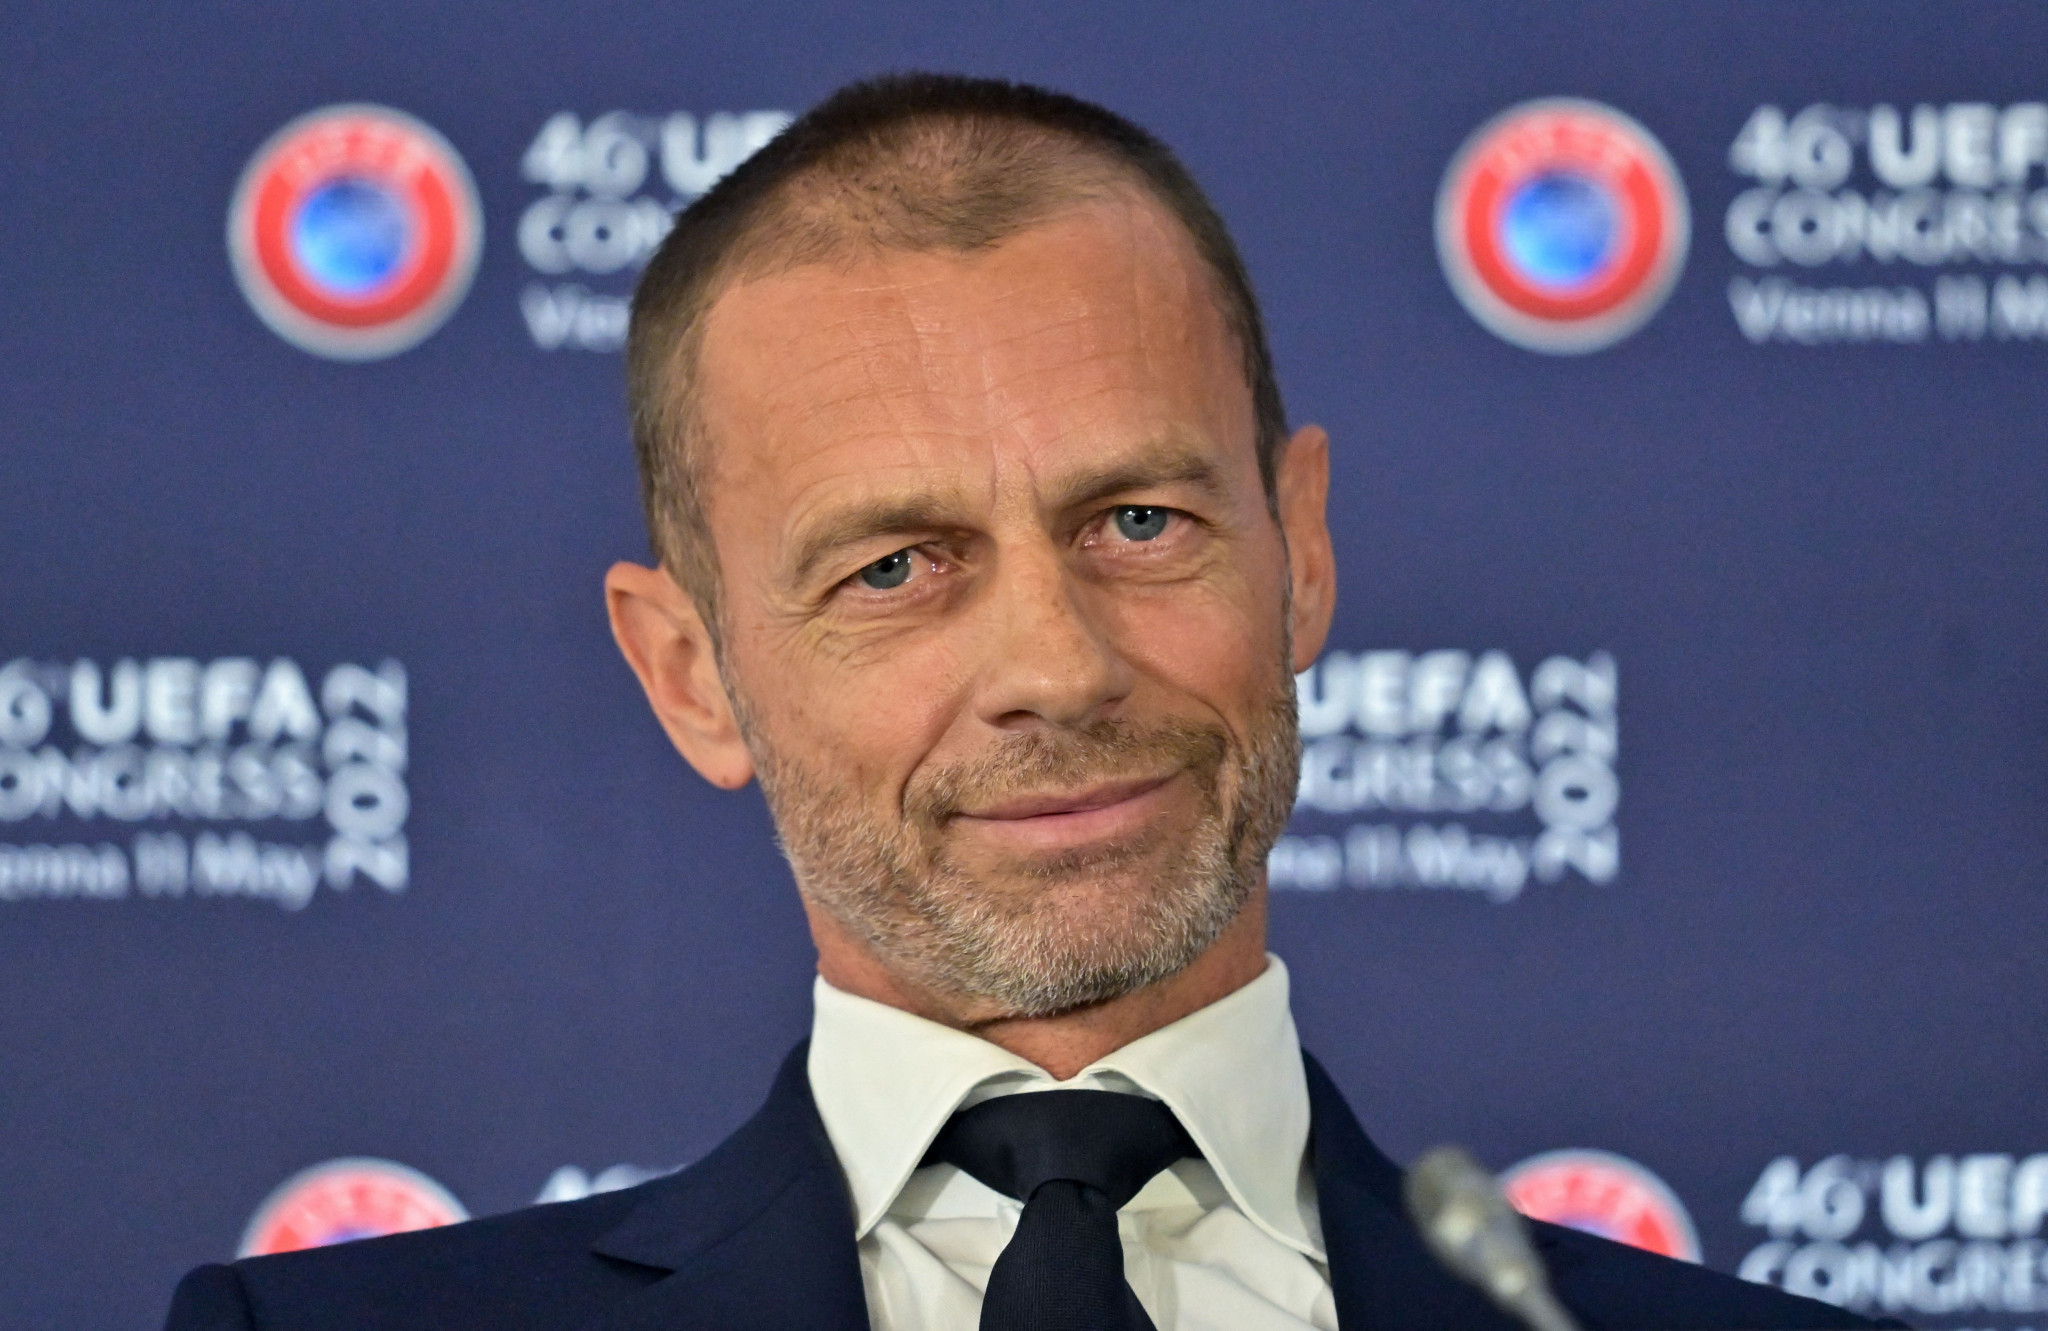 UEFA has re-confirmed that Aleksander Čeferin will stand for re-election to its Presidency unopposed with the announcement of candidates for election at its 47th Ordinary Congress in Lisbon on April 5 ©Getty Images